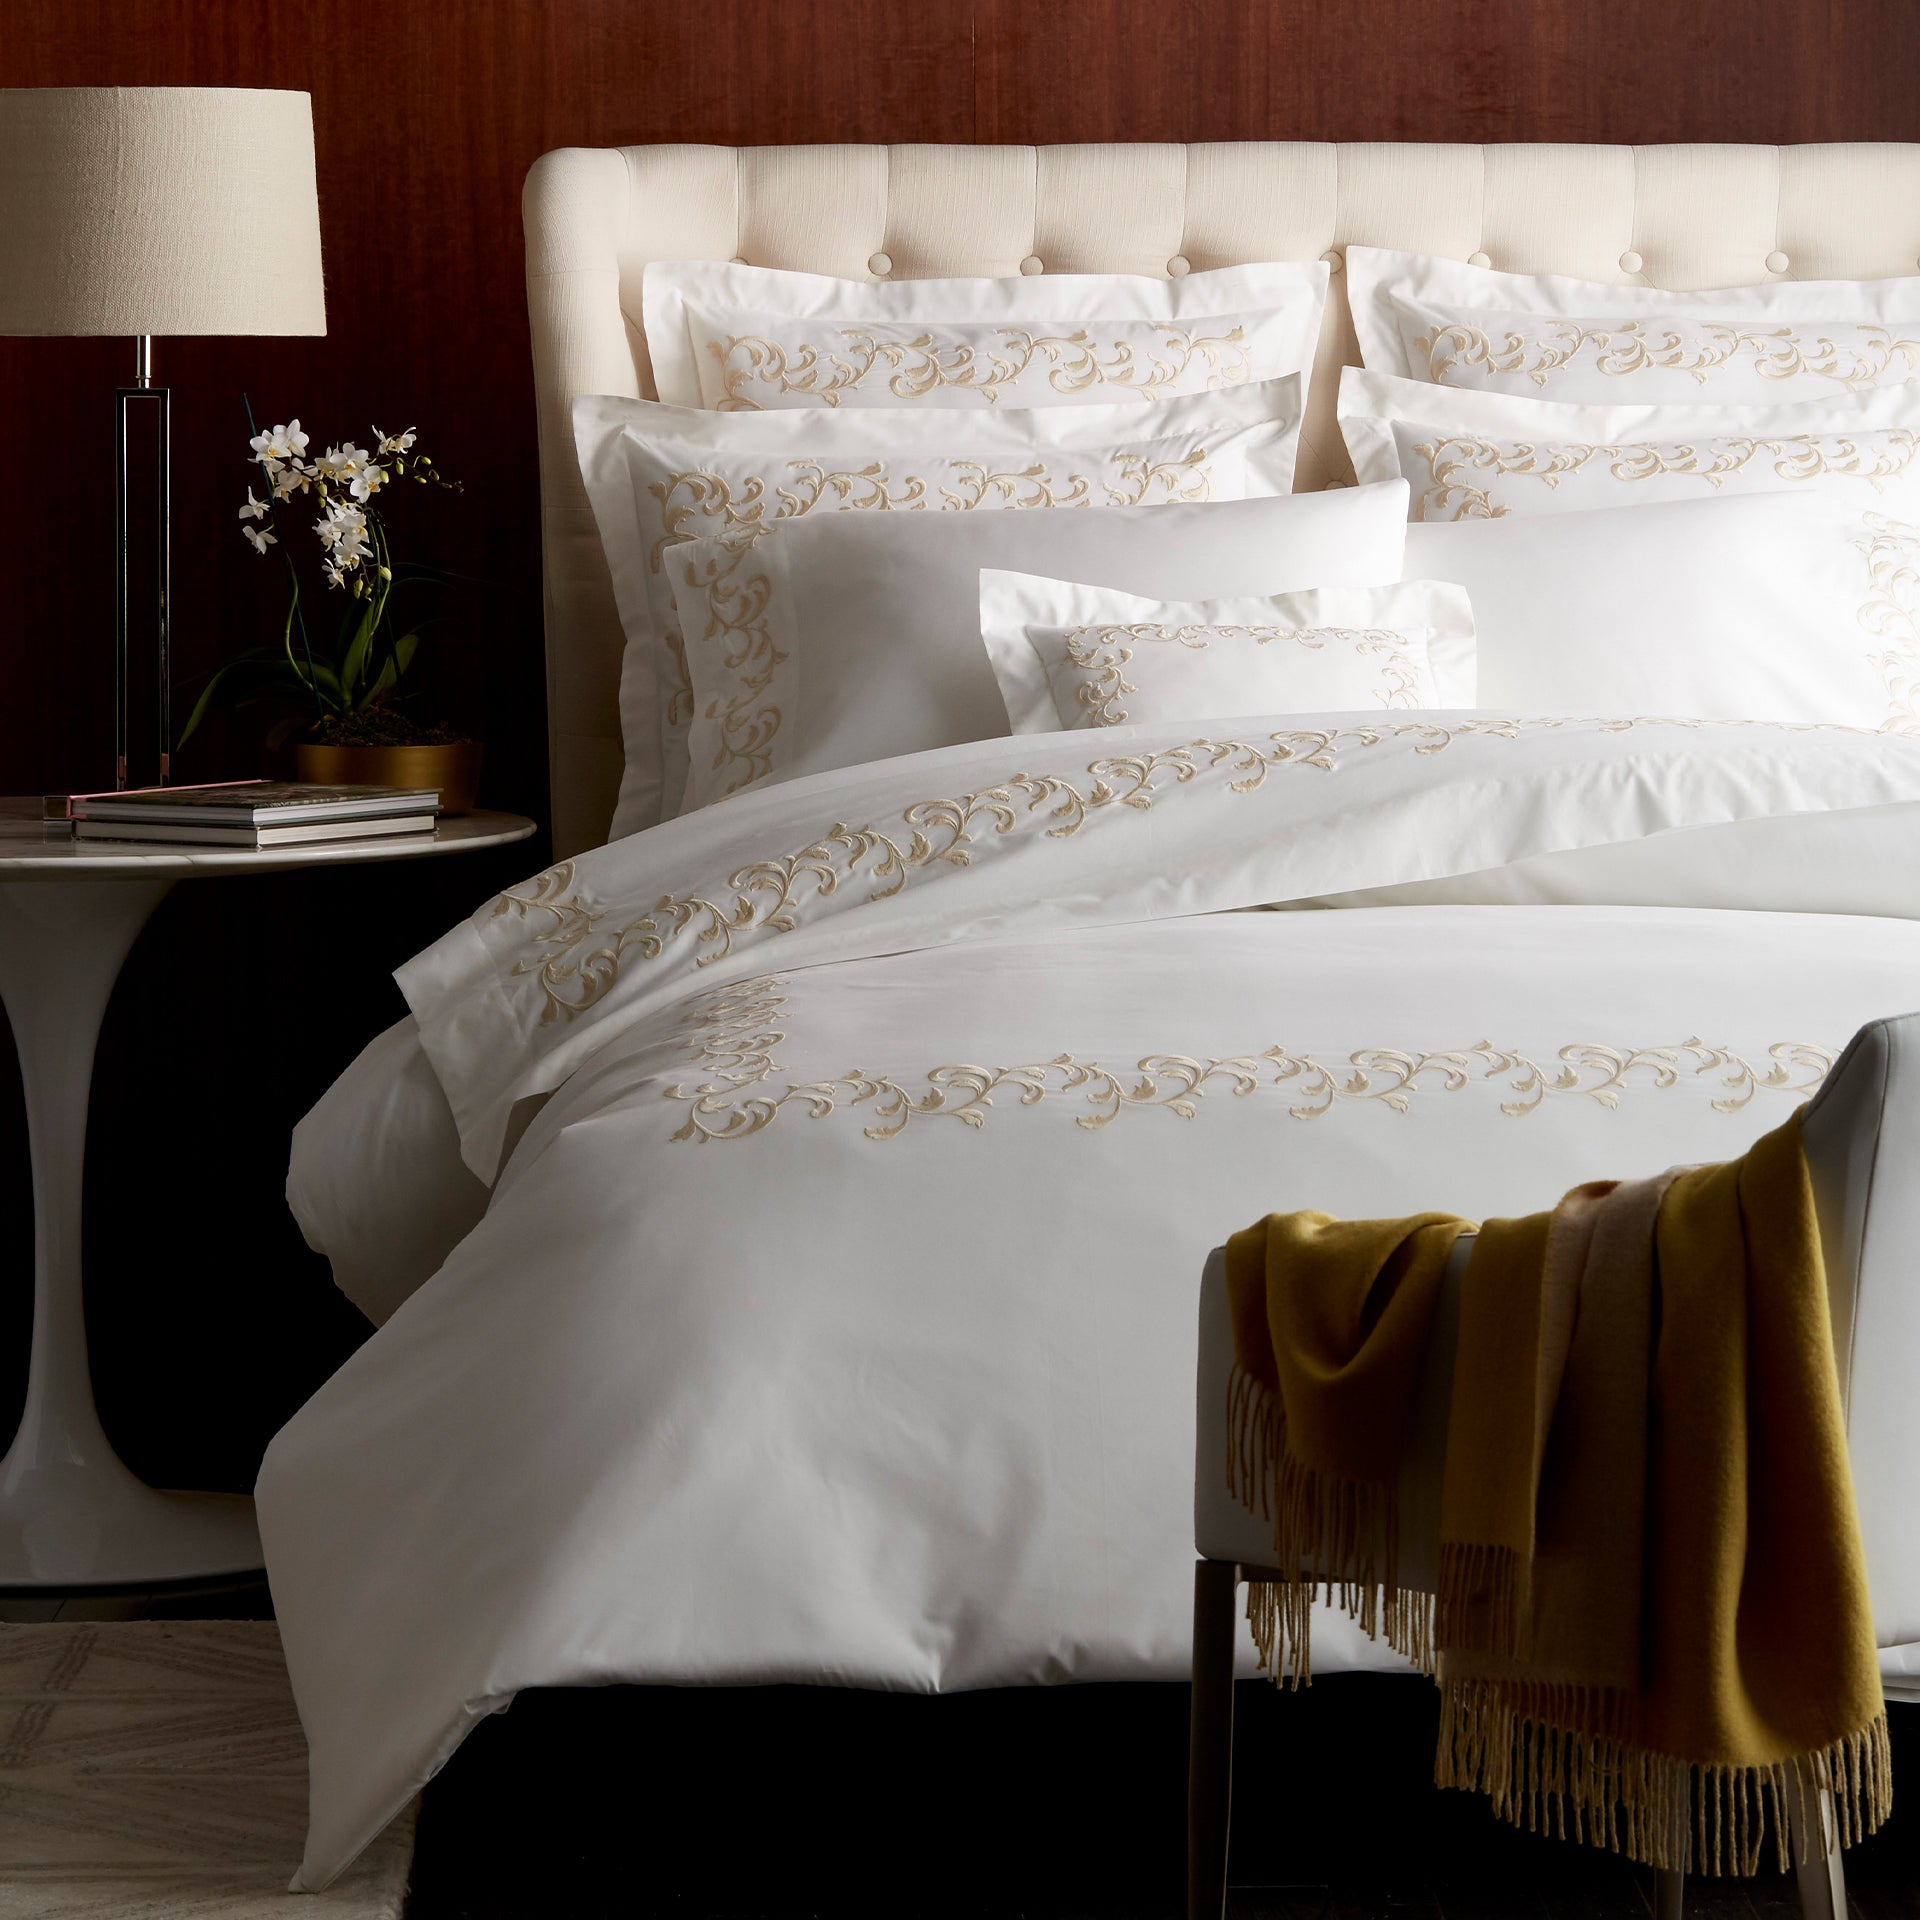 san remo duvet cover with scroll embroidered detail in color cornsilk & ivory. Knife edge design with button closure 